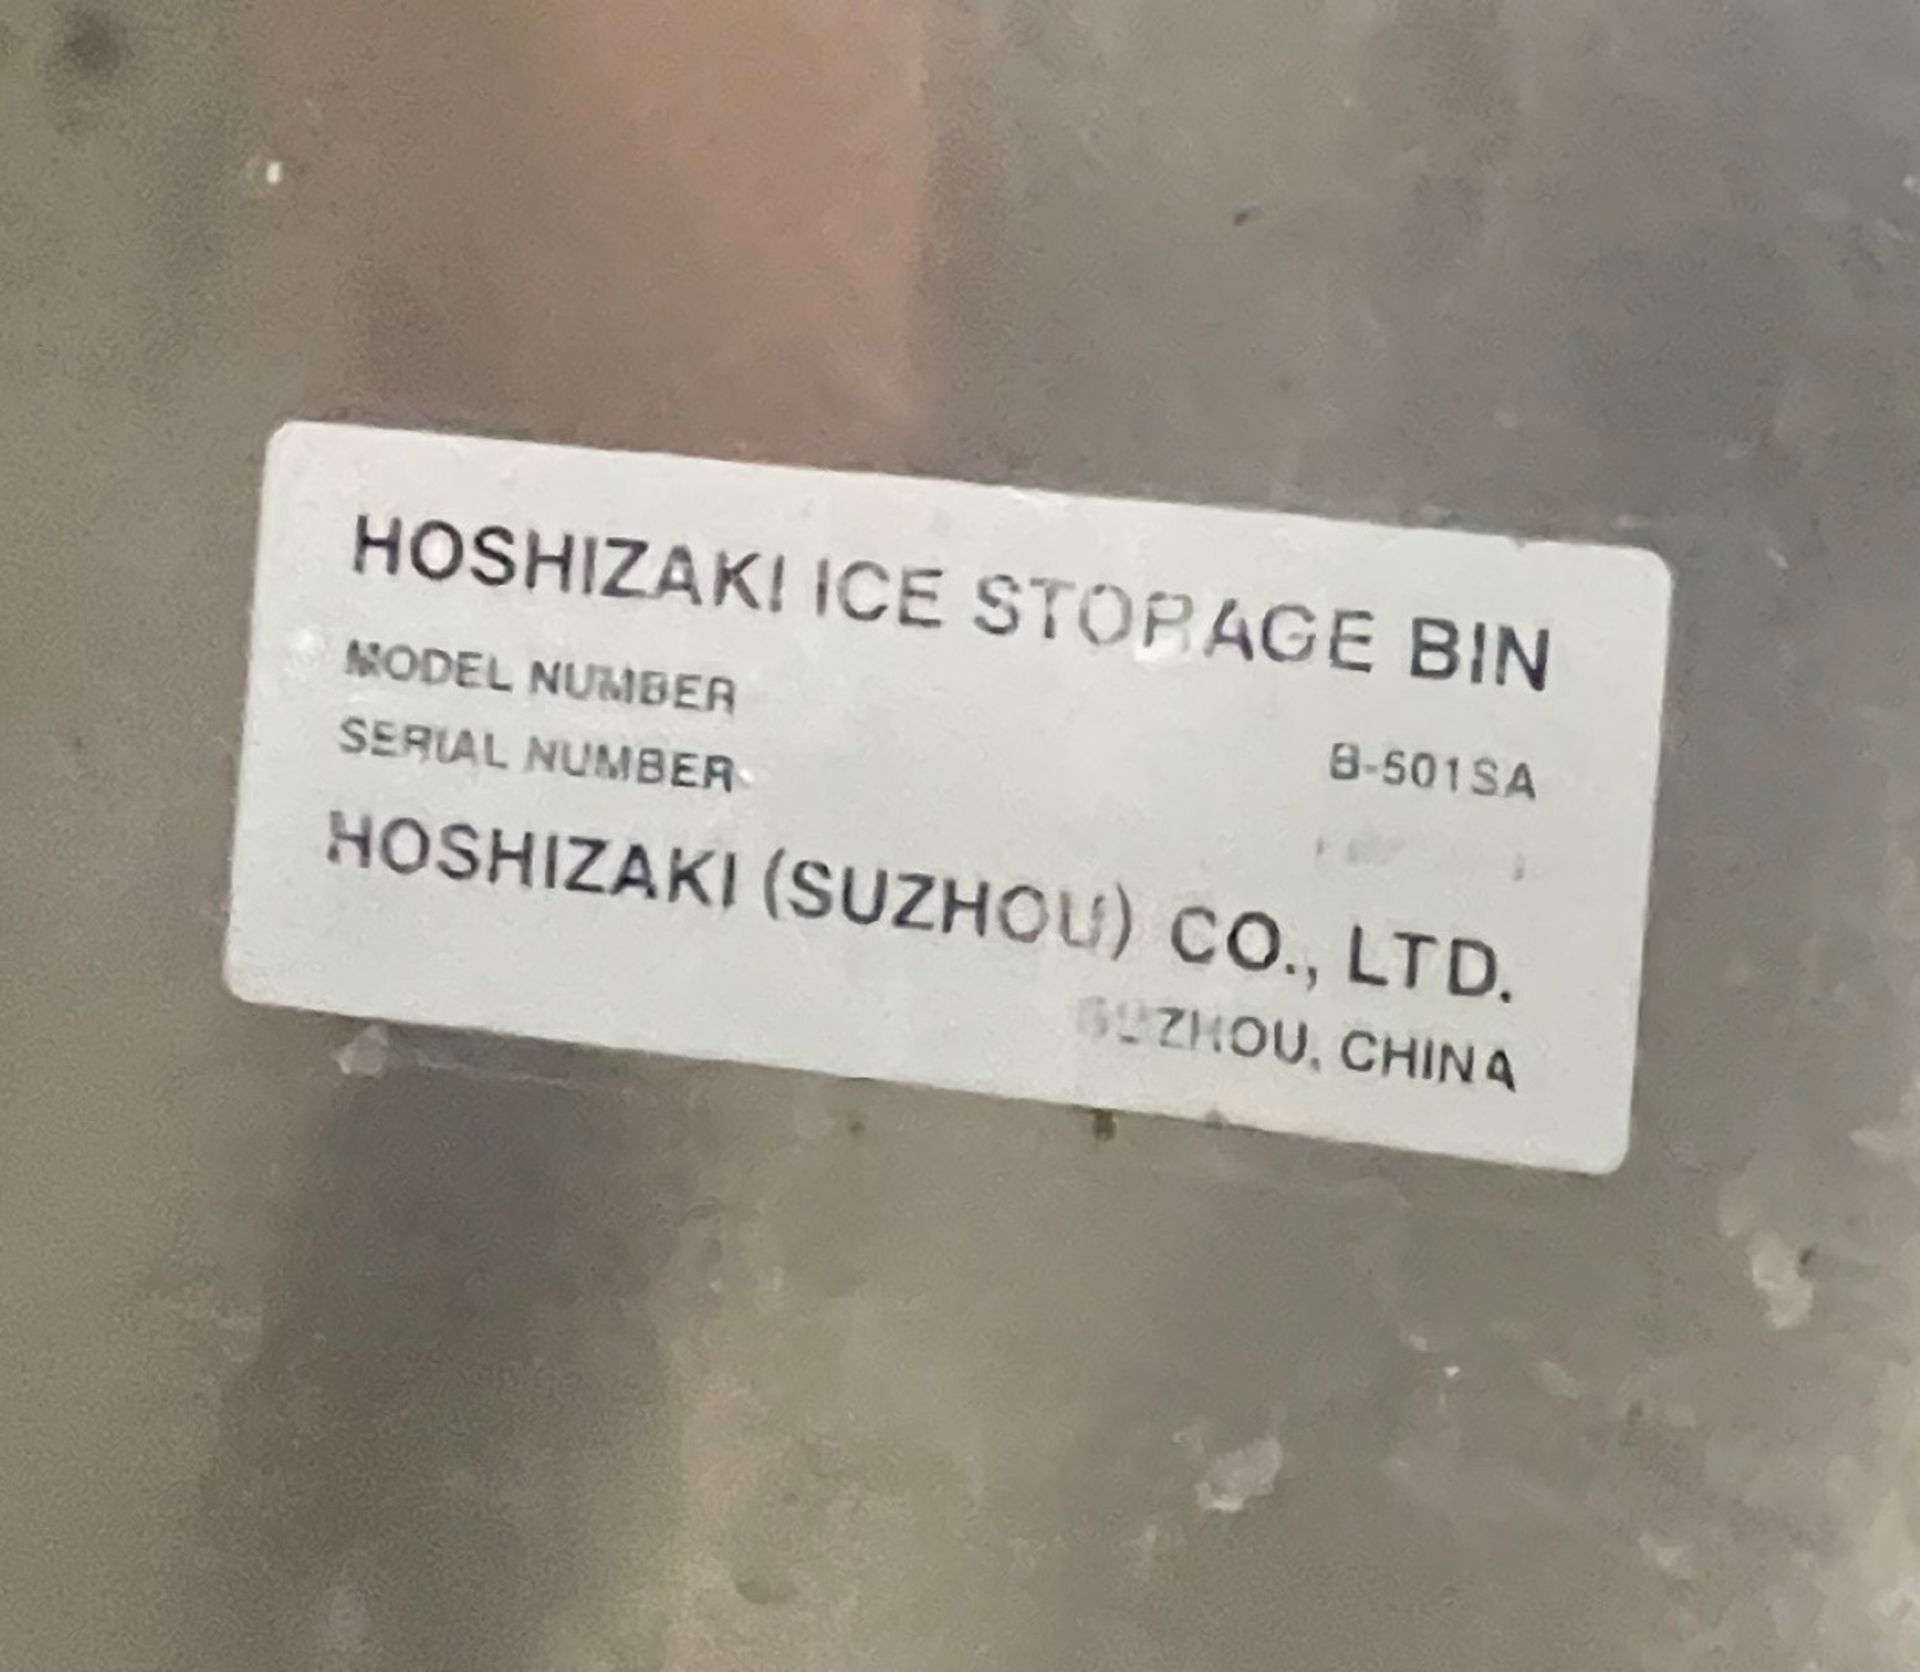 1 x Hoshizaki IM-240ANE Ice Cube Maker (240kg/24hr) With Ice Bin - Current Model - RRP £5,800 - Image 10 of 10